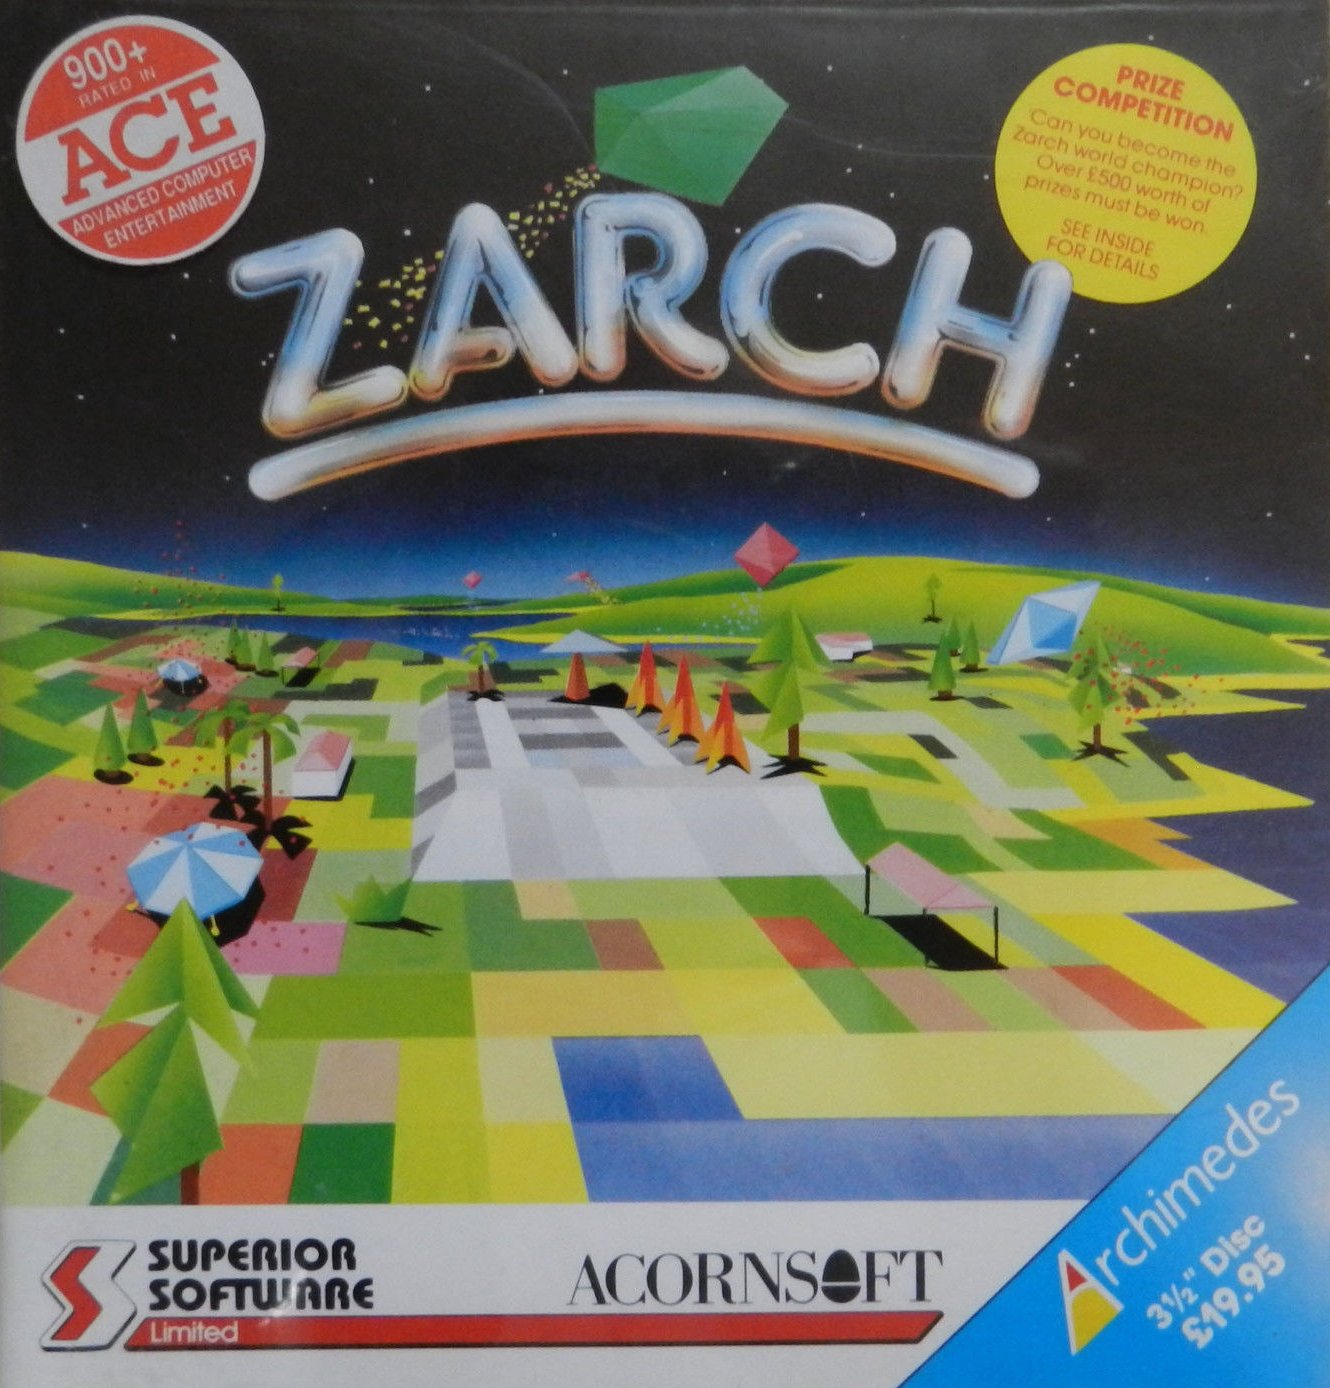 Image of Zarch